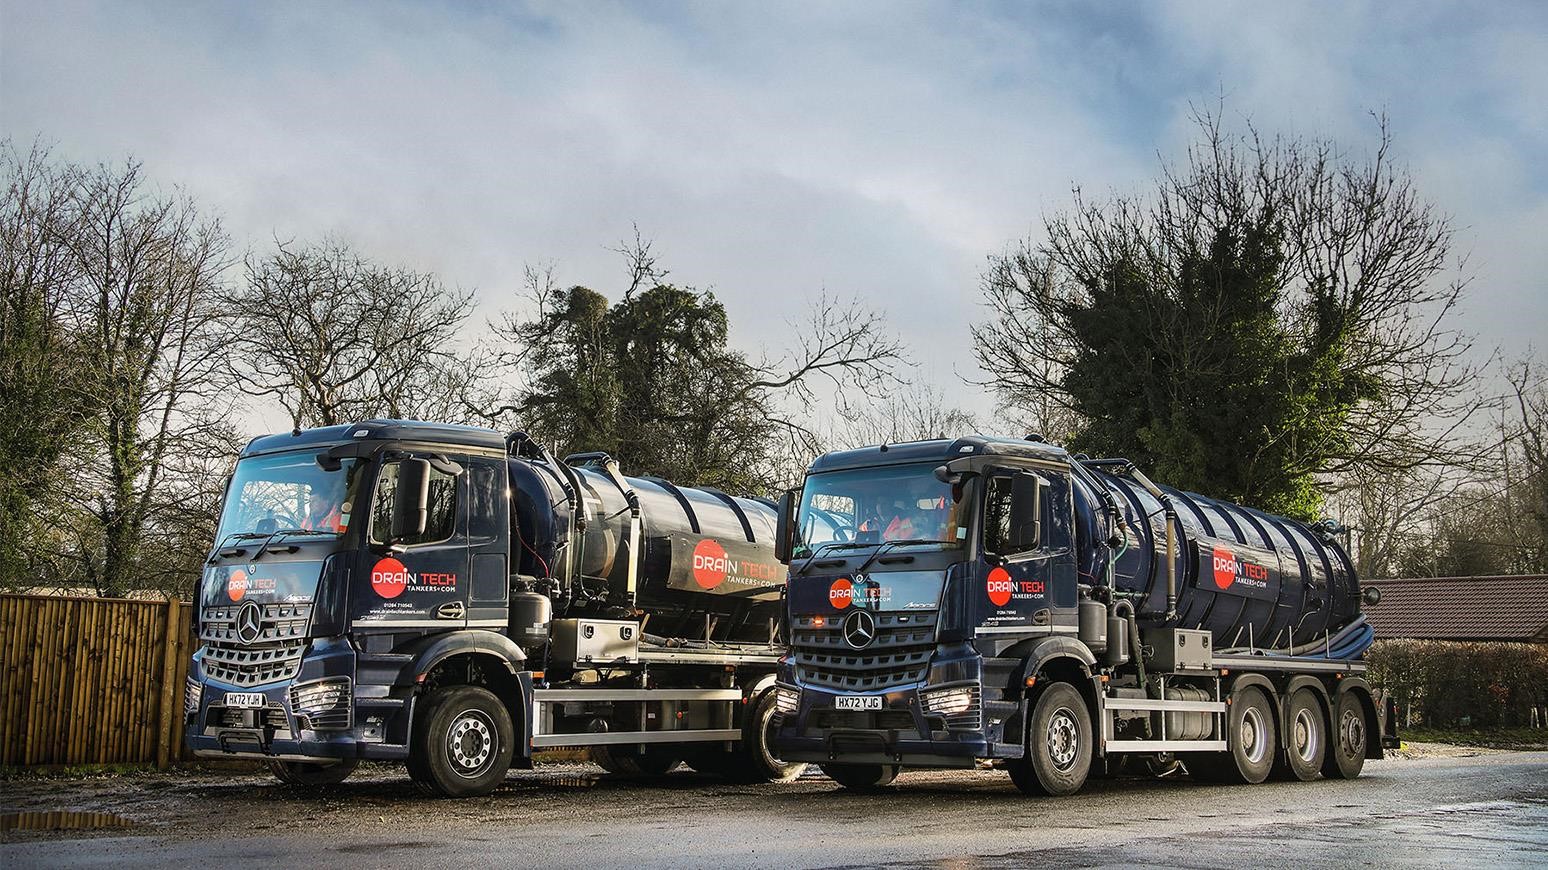 A Brace Of Mercedes-Benz Arocs On Order After First Pair Excels For Draintech Tankers